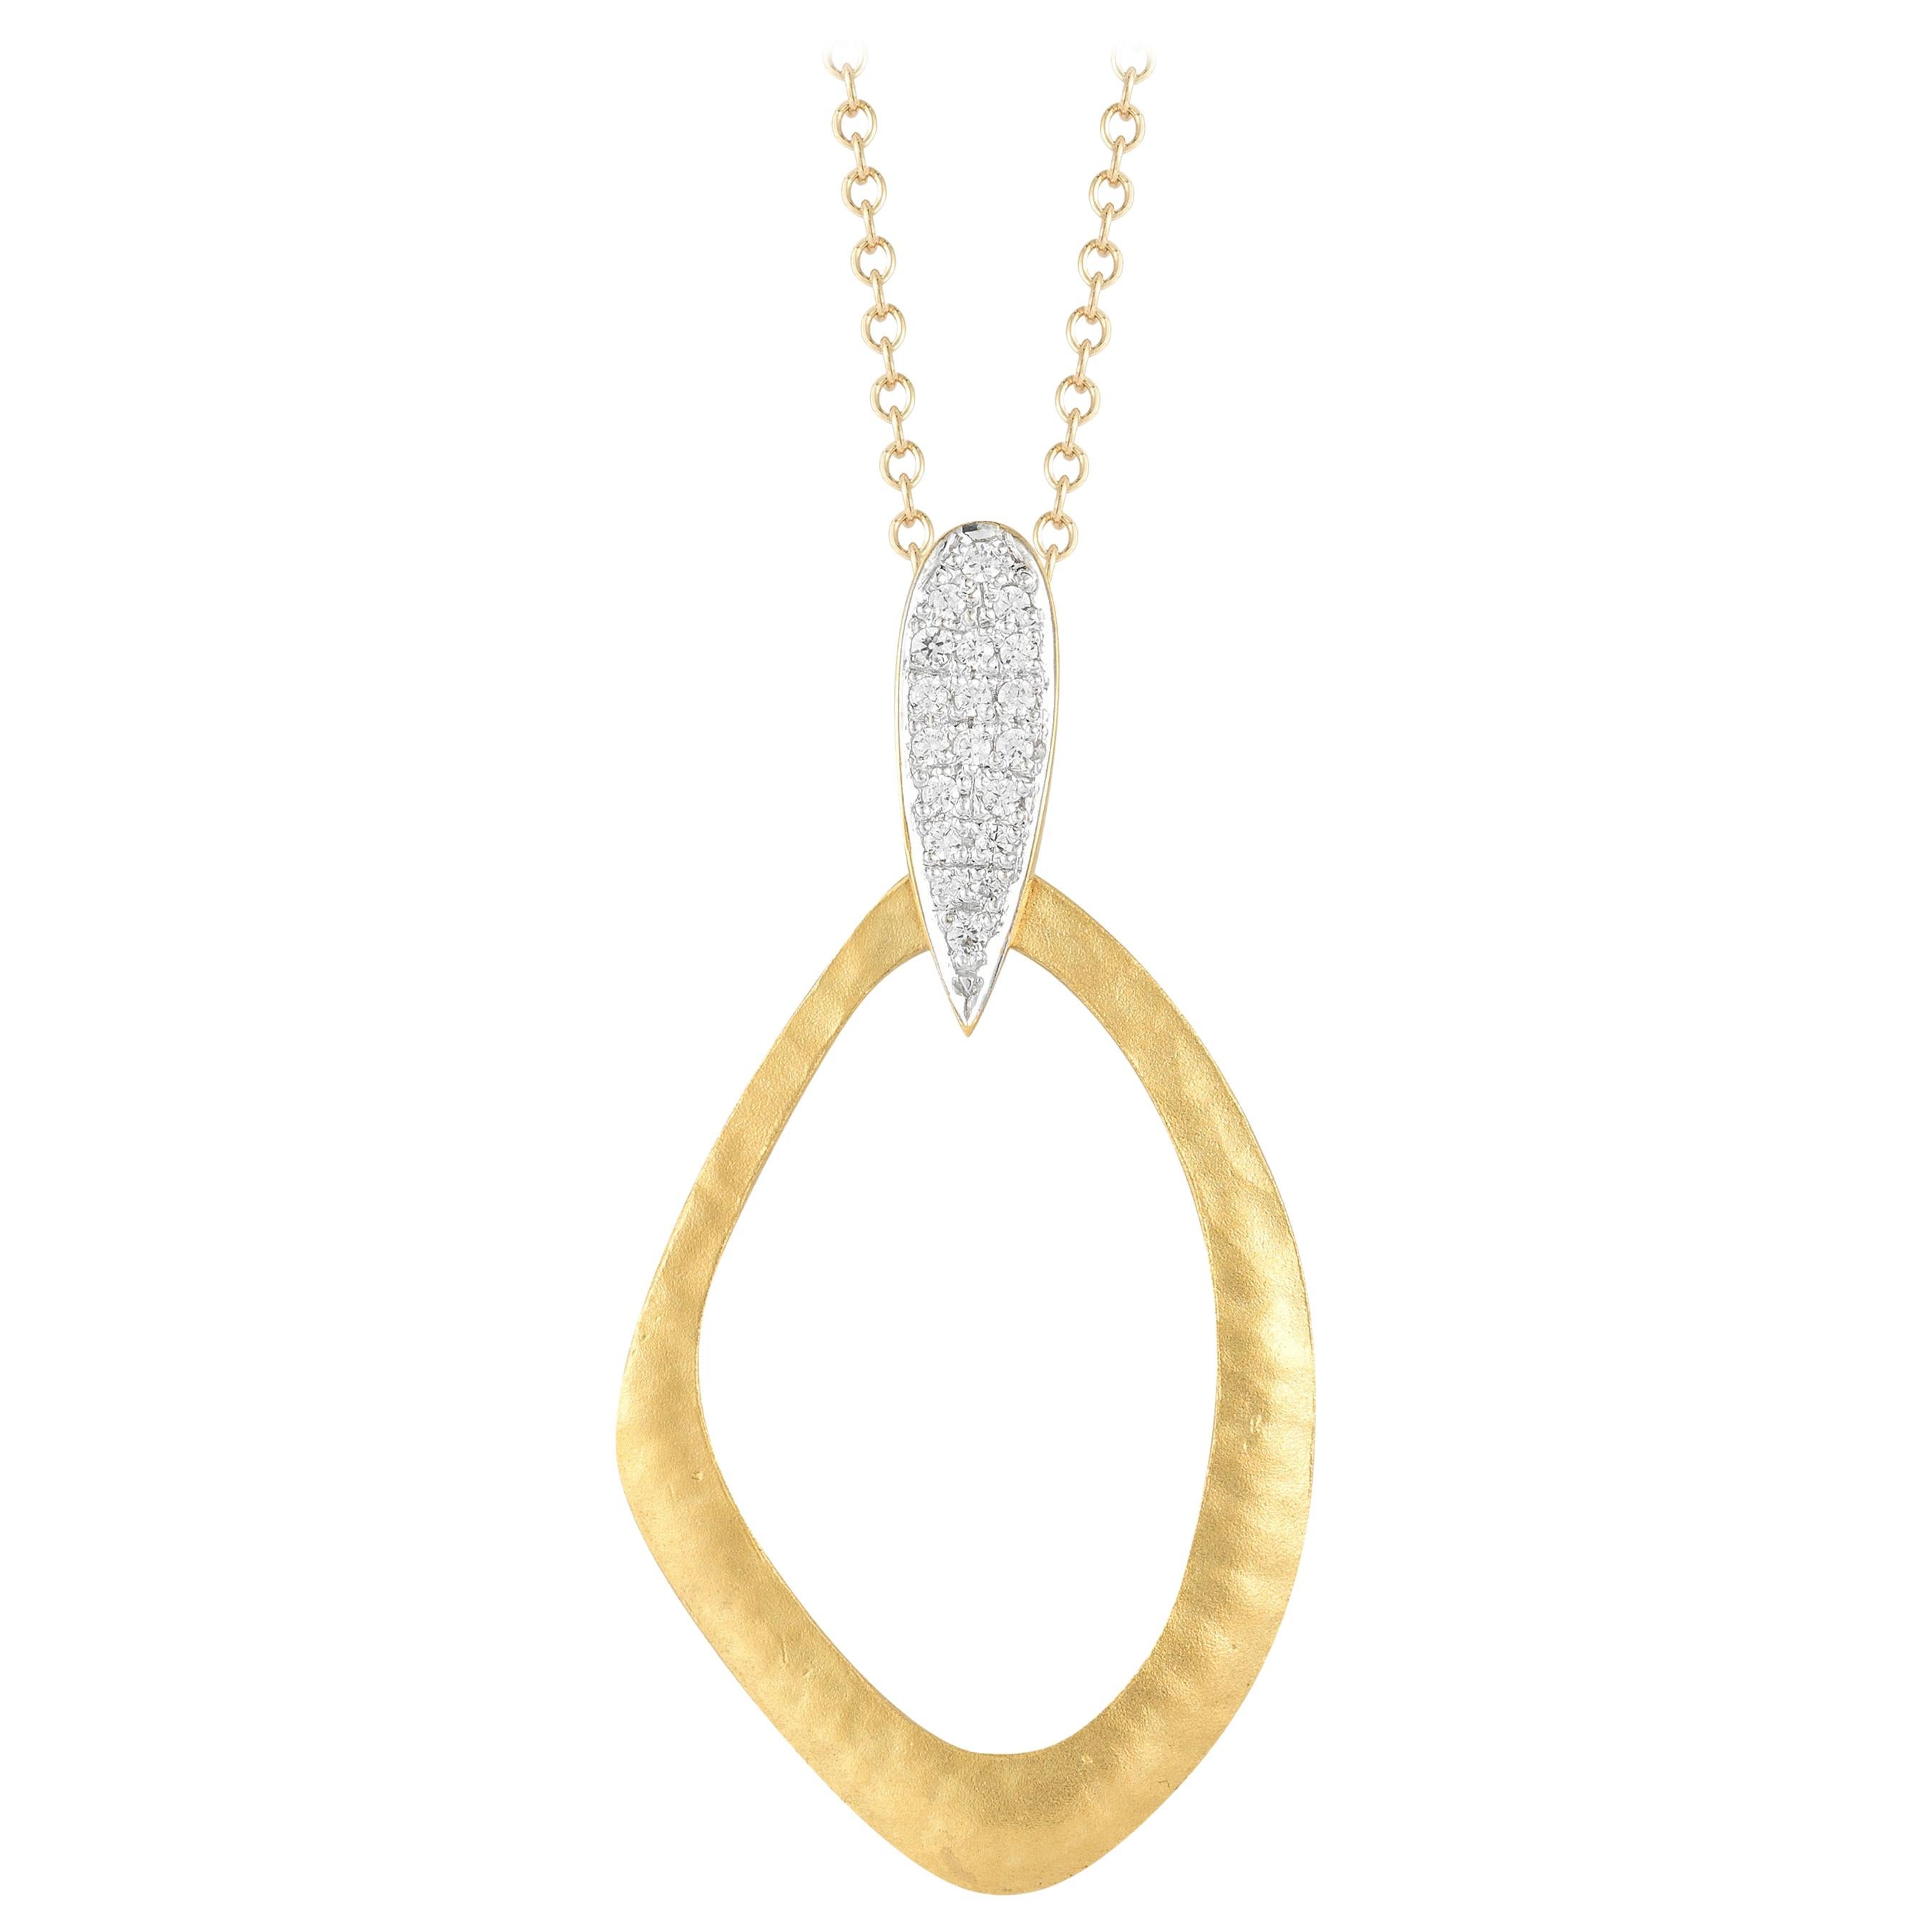 Handcrafted 14 Karat Yellow Gold Hammered Pendant Accented with Diamonds For Sale